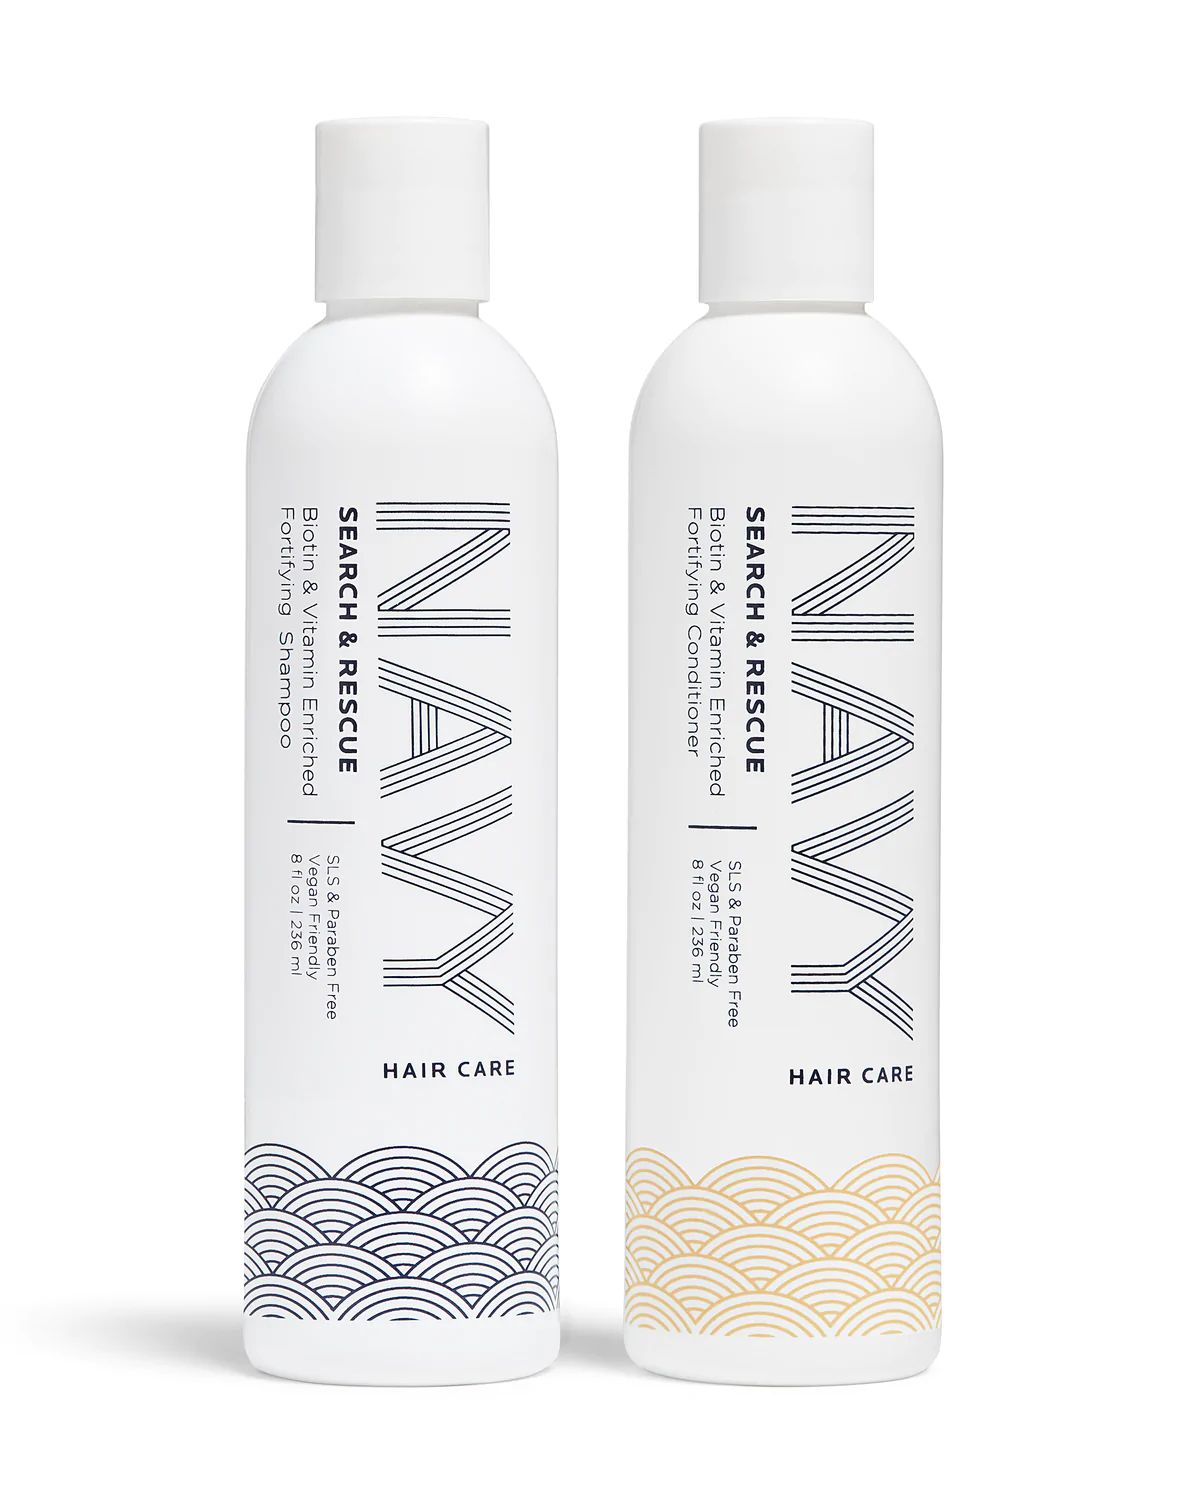 Search & Rescue - Shampoo and Conditioner | NAVY Hair Care